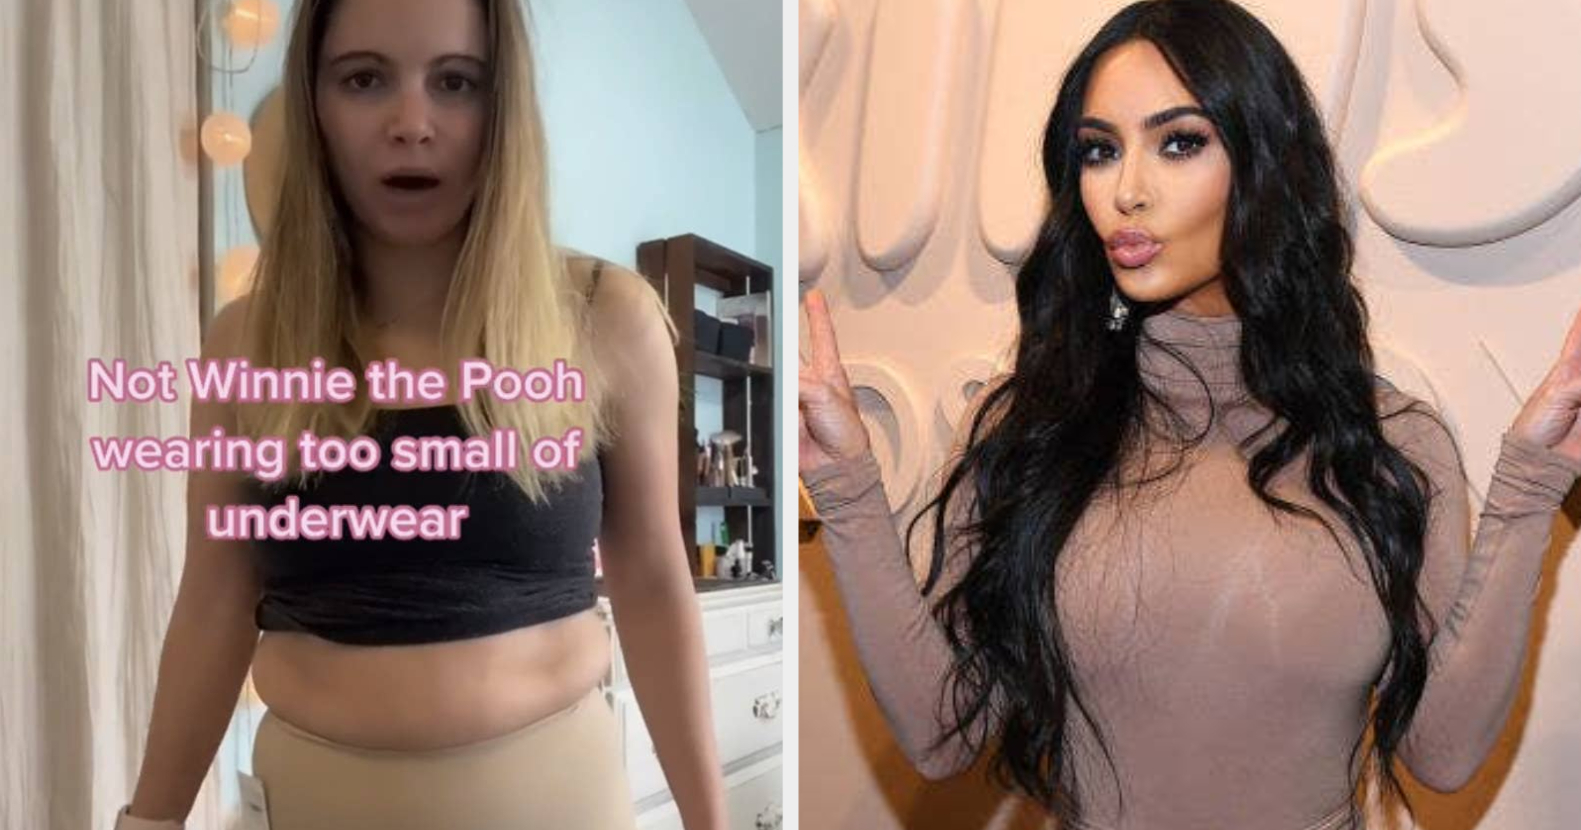 I'm midsize and was so excited to try Kim Kardashian's SKIMS